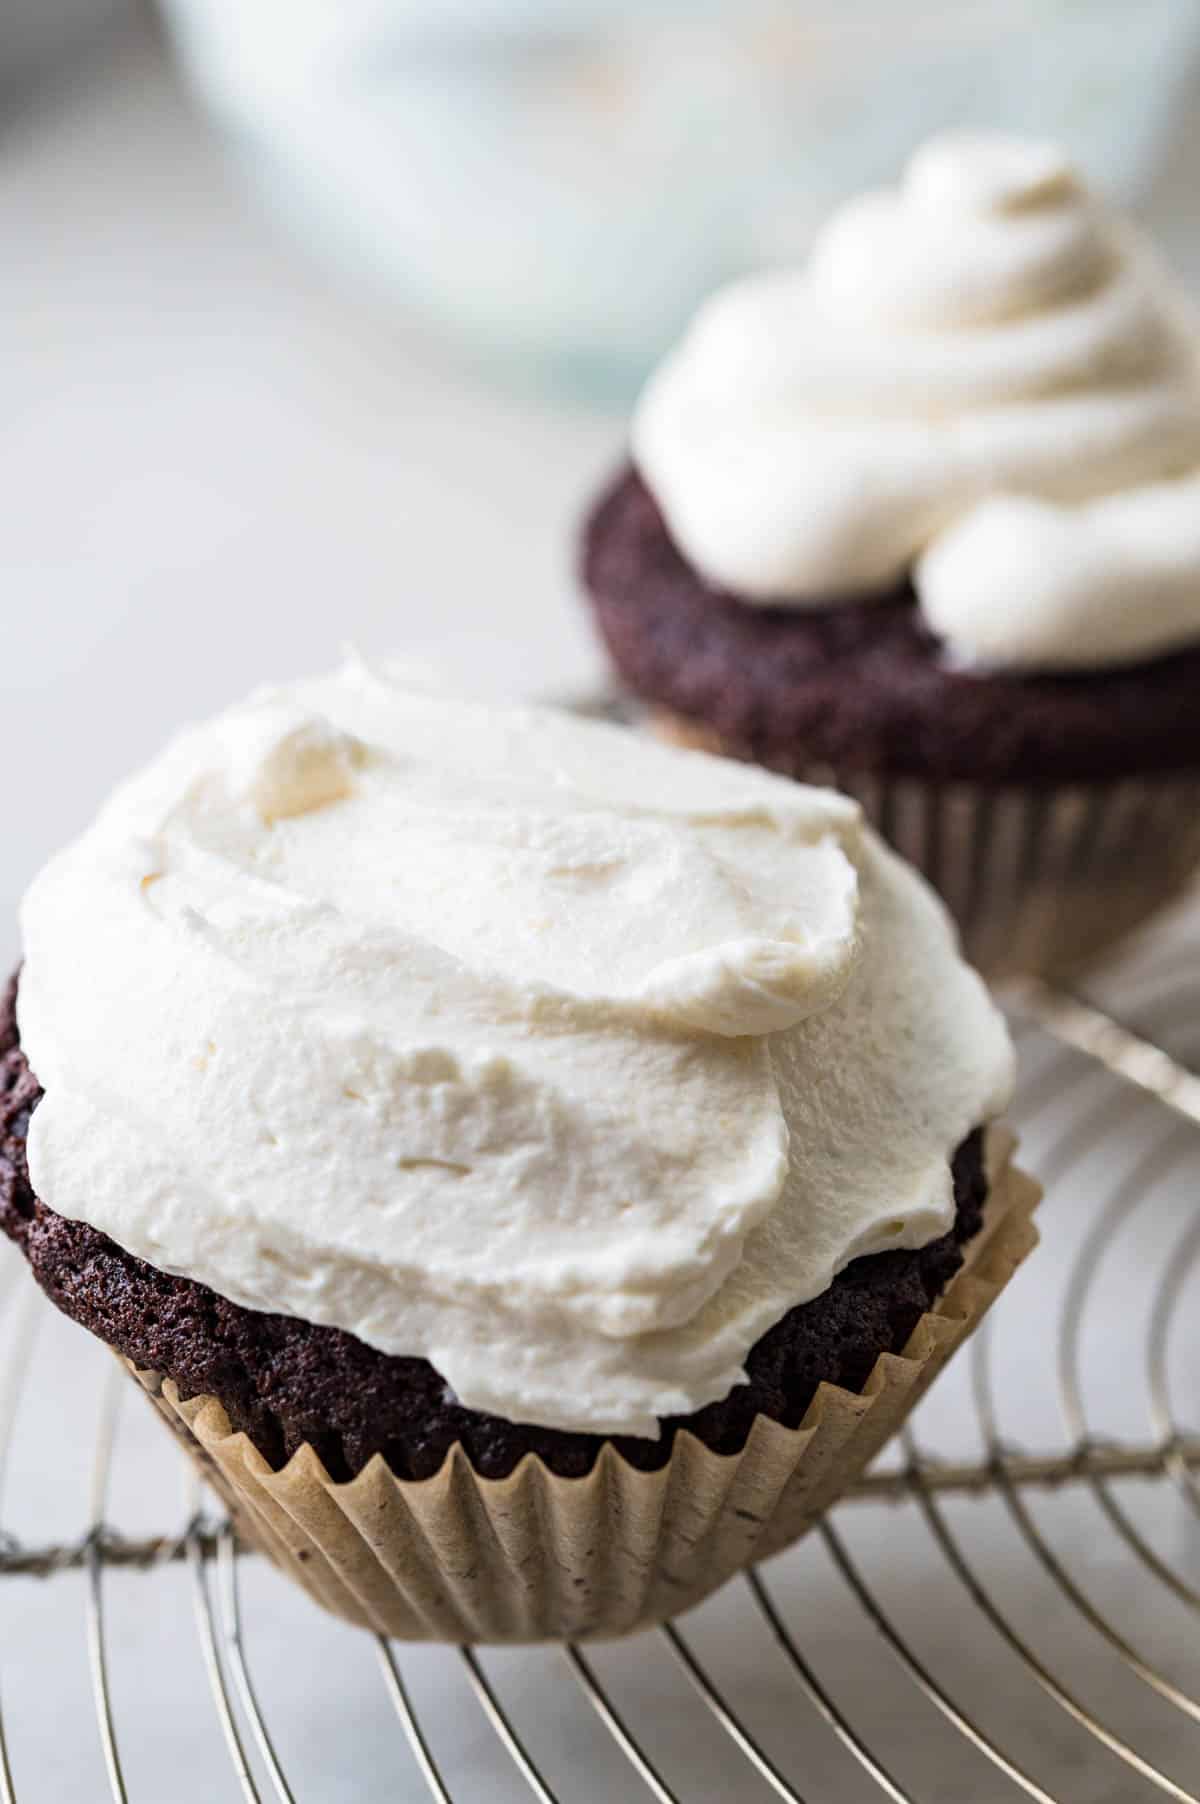 whipped icing on a chocolate cupcake.